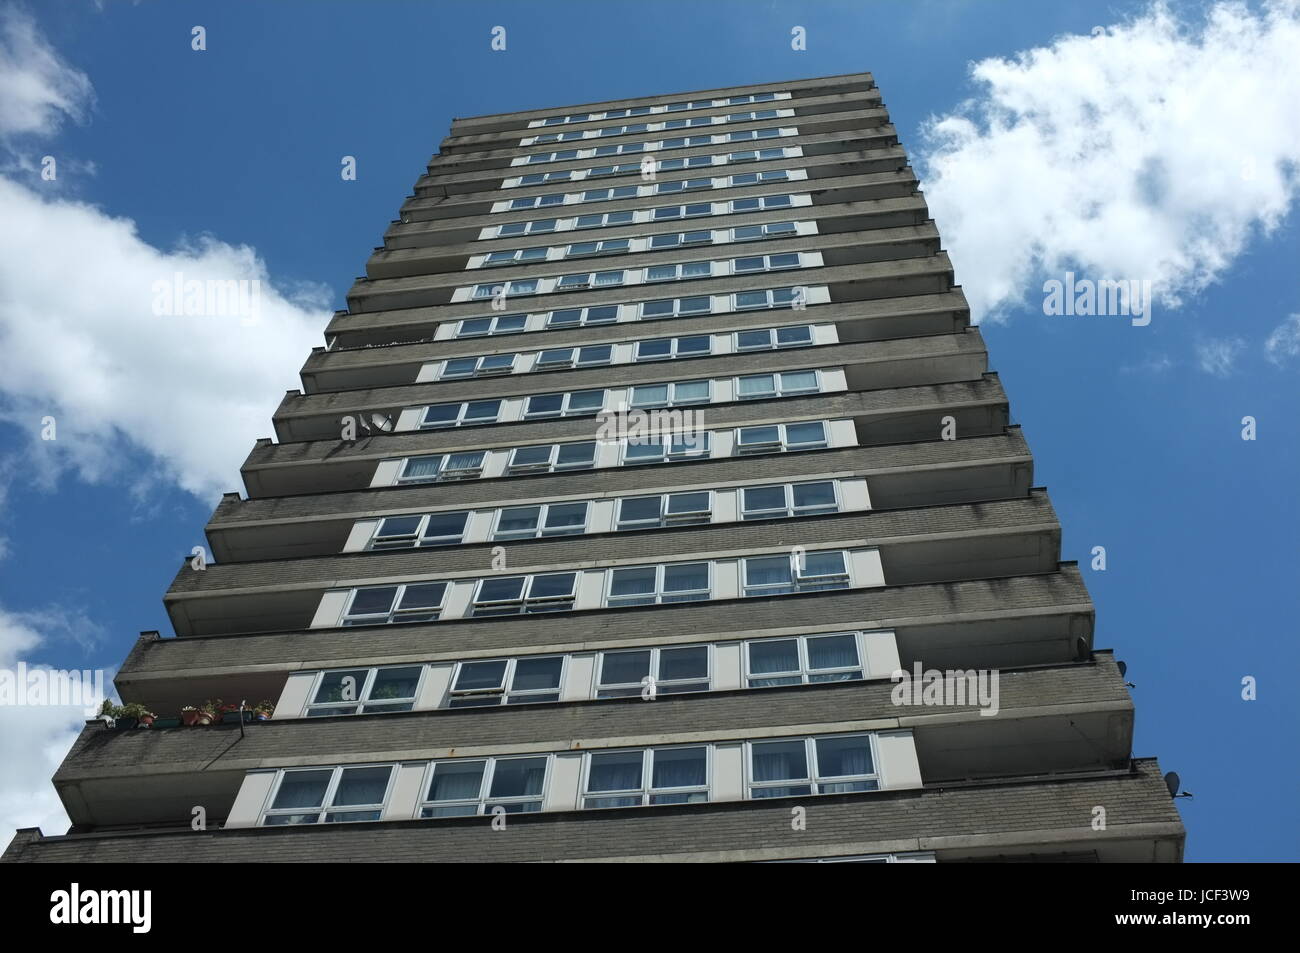 Notting Hill, Kensington, UK. 15th Jun, 2017. The site of the Grenfell Tower fire disaster at around 2.30pm on Thursday, 15 June 2017. Notting Hill, North Kensington, West London, United Kingdom. Credit: Robert Smith/Alamy Live News Stock Photo